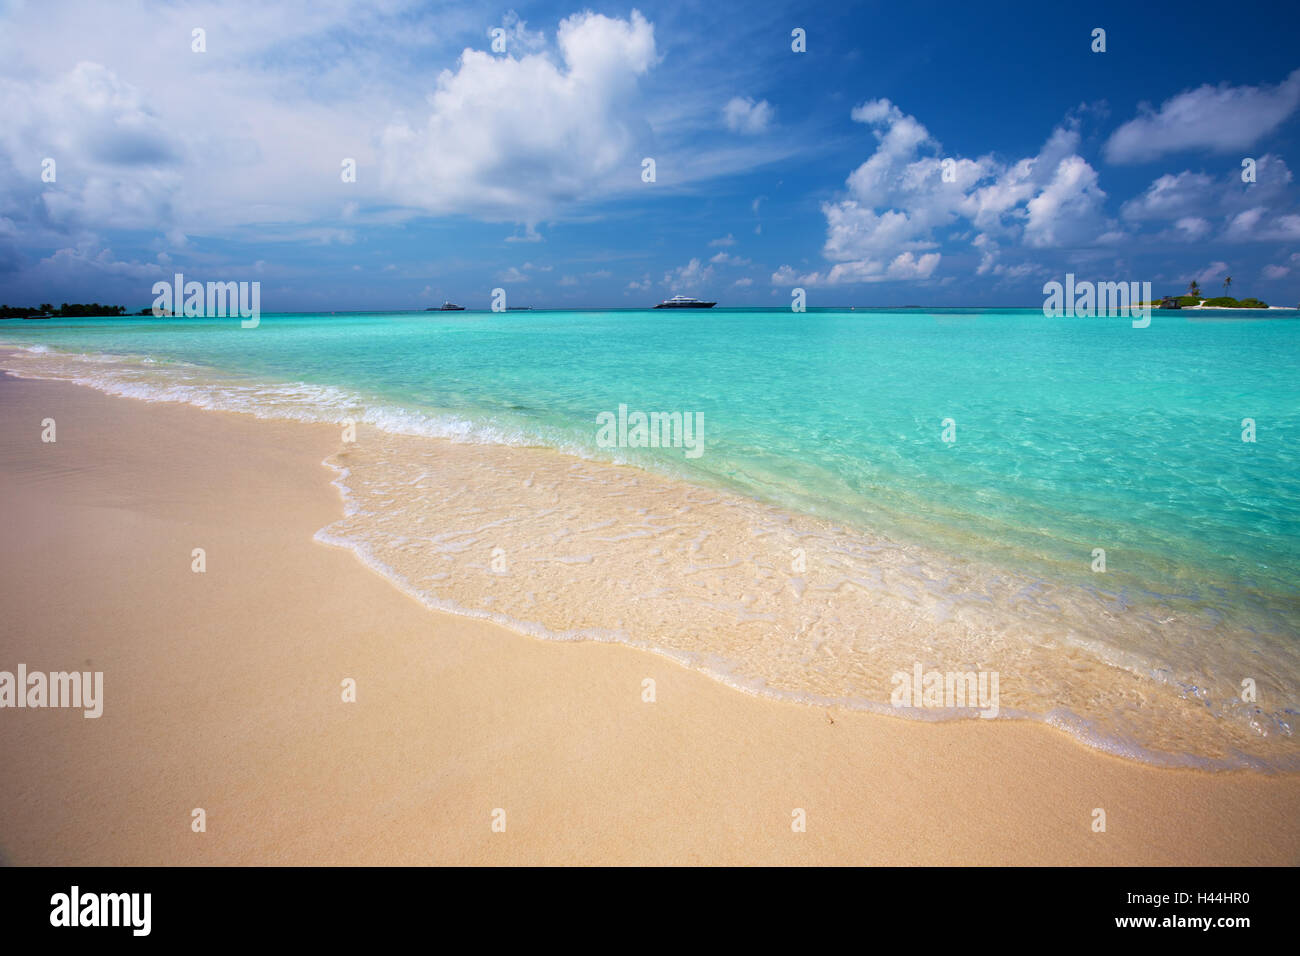 Tropical island with sandy beach with palm trees and turquoise clear water, Maldives Stock Photo